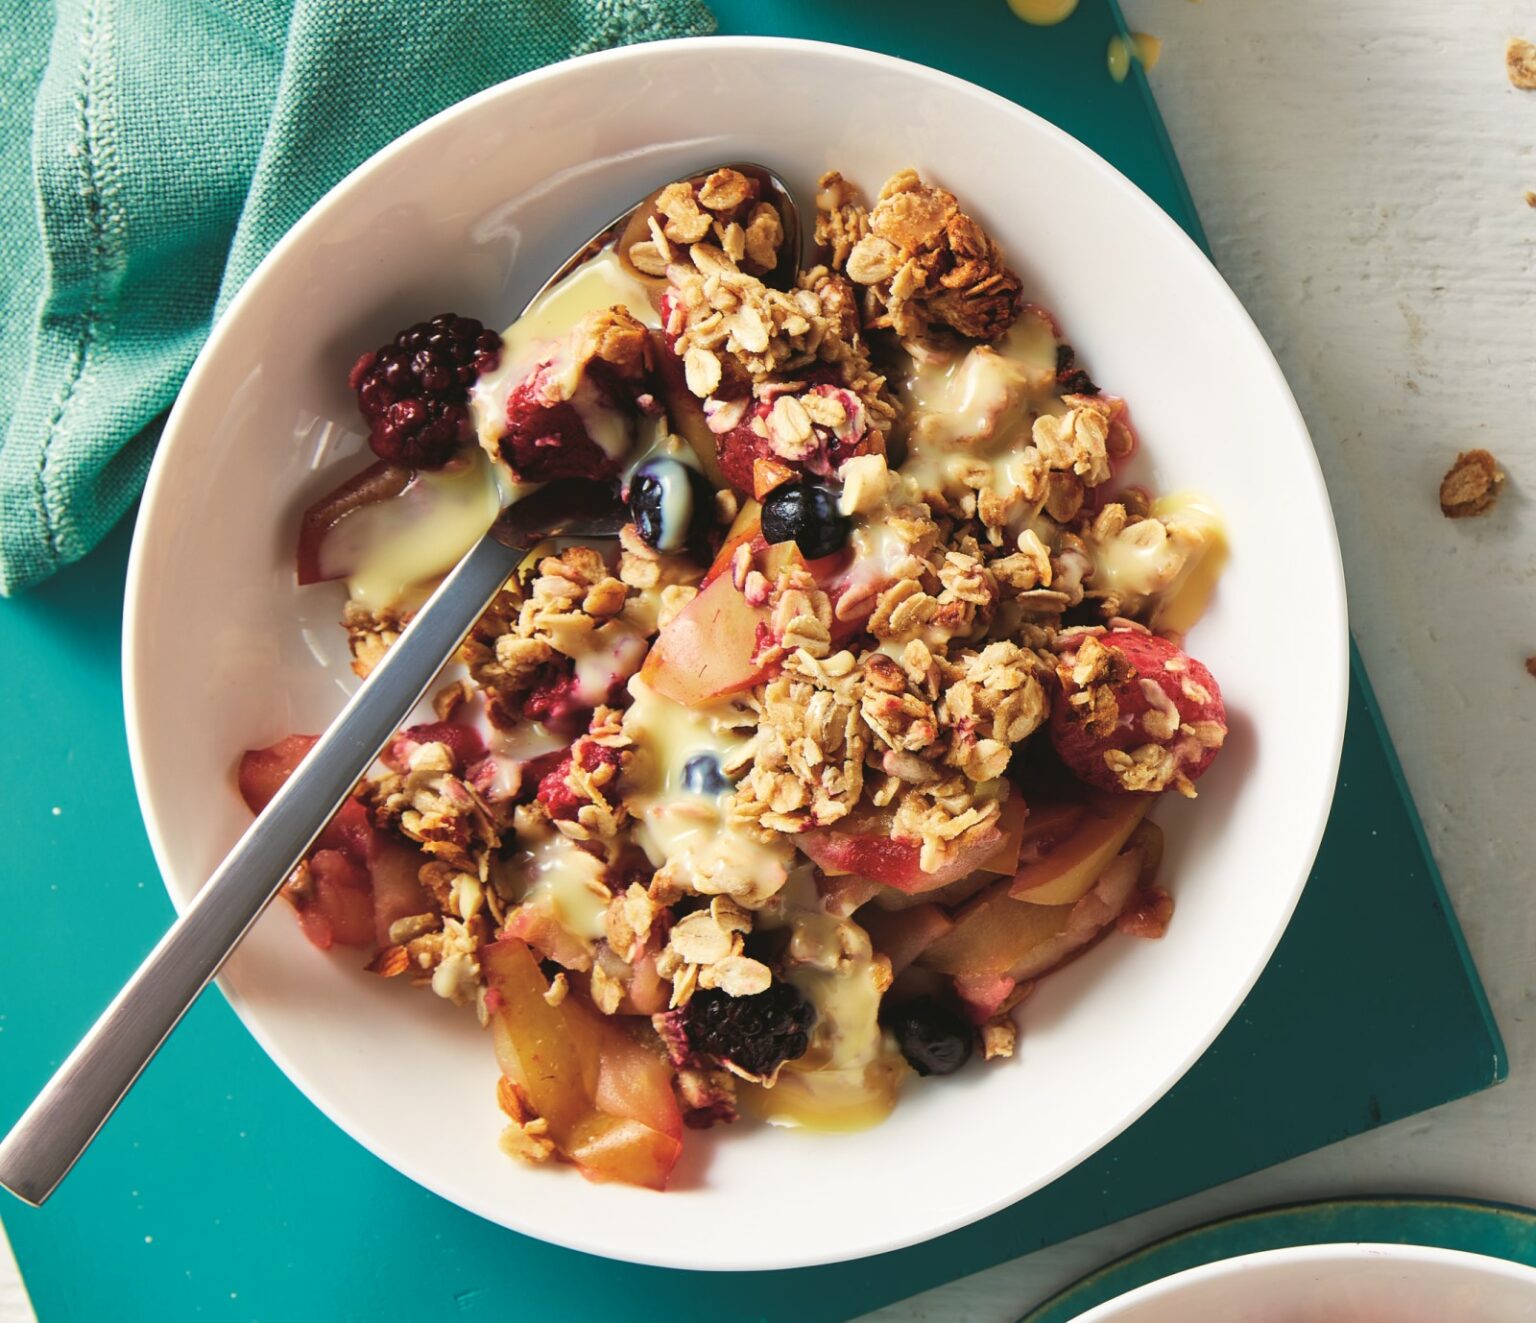 Apple and mixed berry crumble